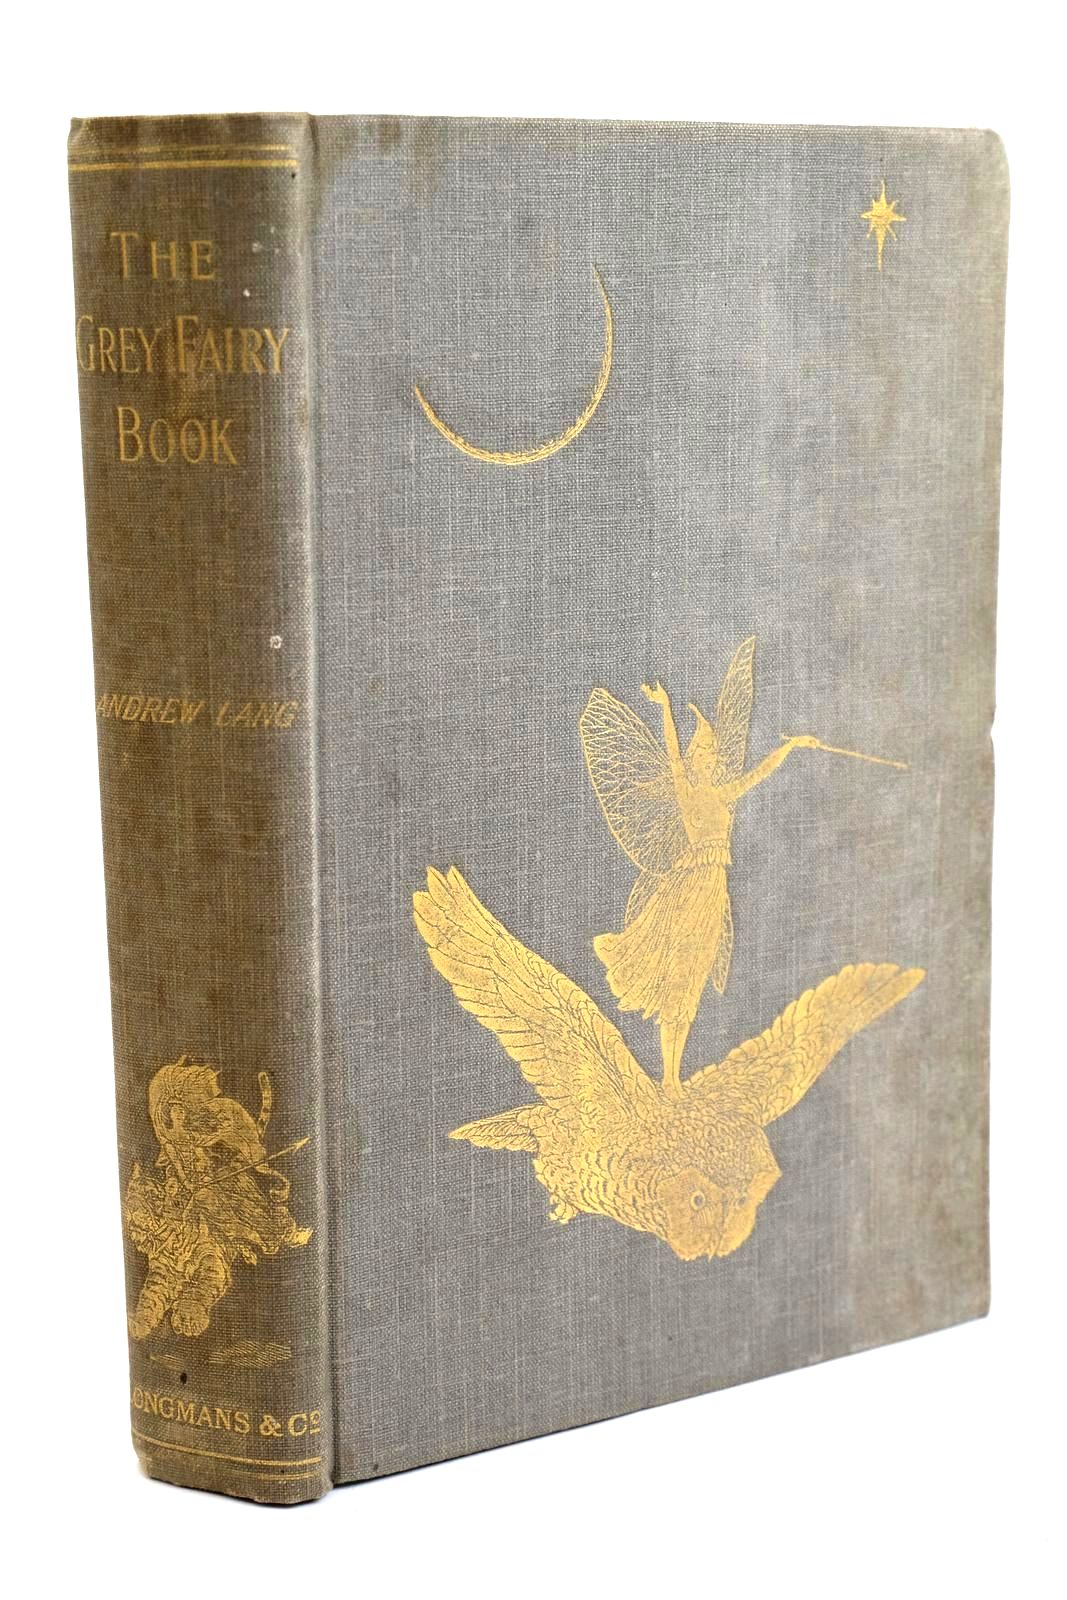 Photo of THE GREY FAIRY BOOK written by Lang, Andrew illustrated by Ford, H.J. published by Longmans, Green &amp; Co. (STOCK CODE: 1321635)  for sale by Stella & Rose's Books